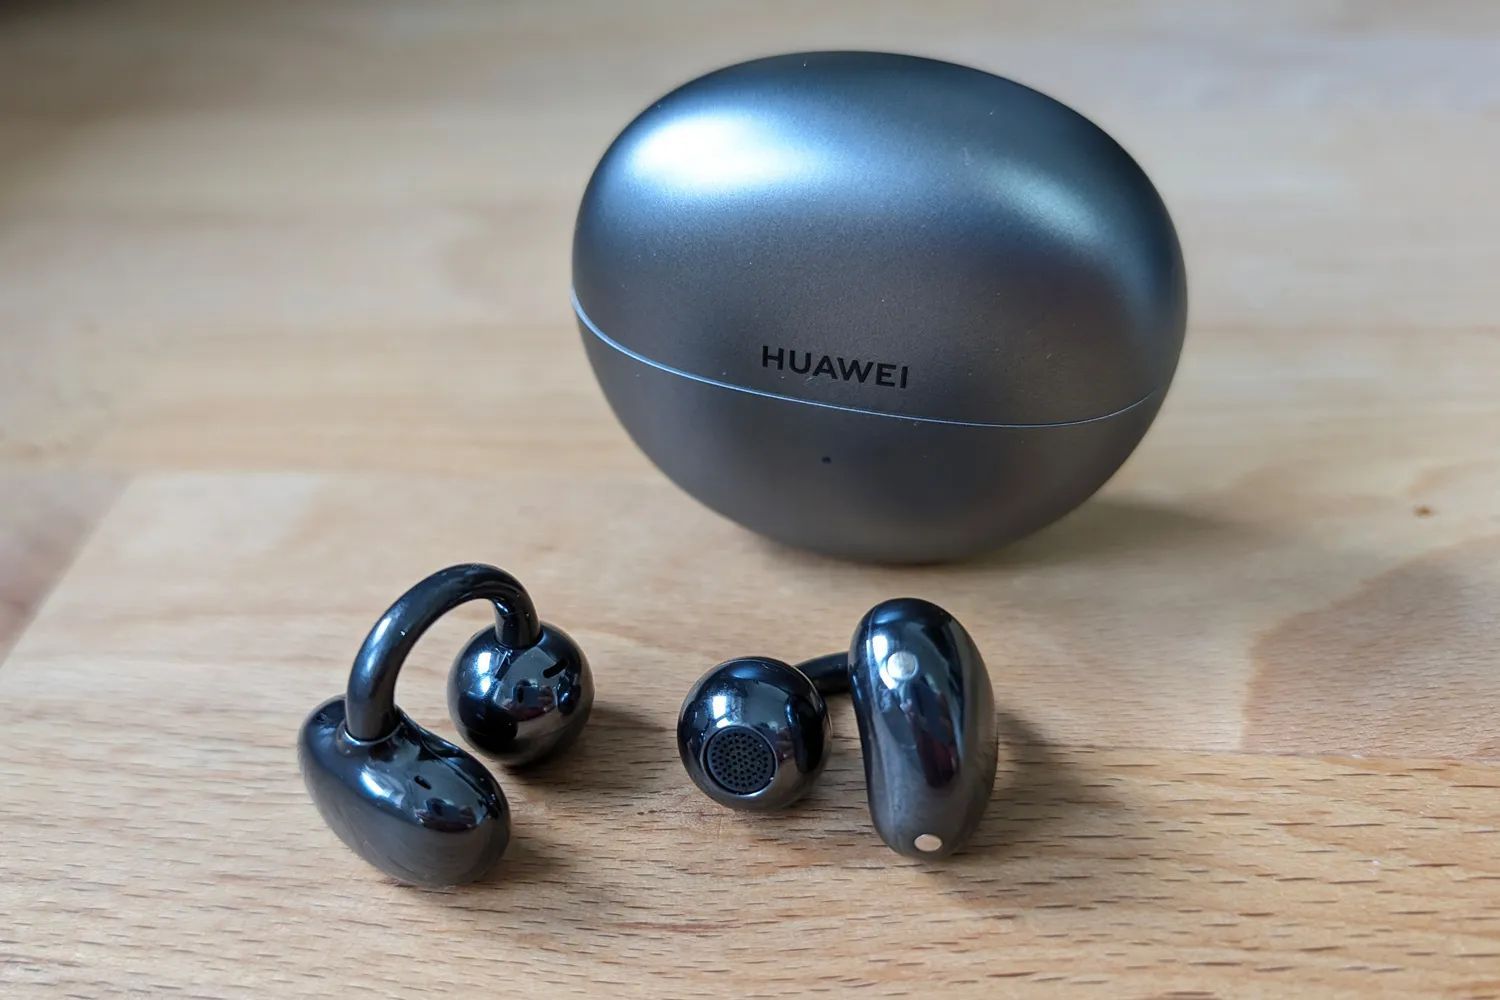 Introducing the new Huawei FreeClip and it's TOP FEATURES